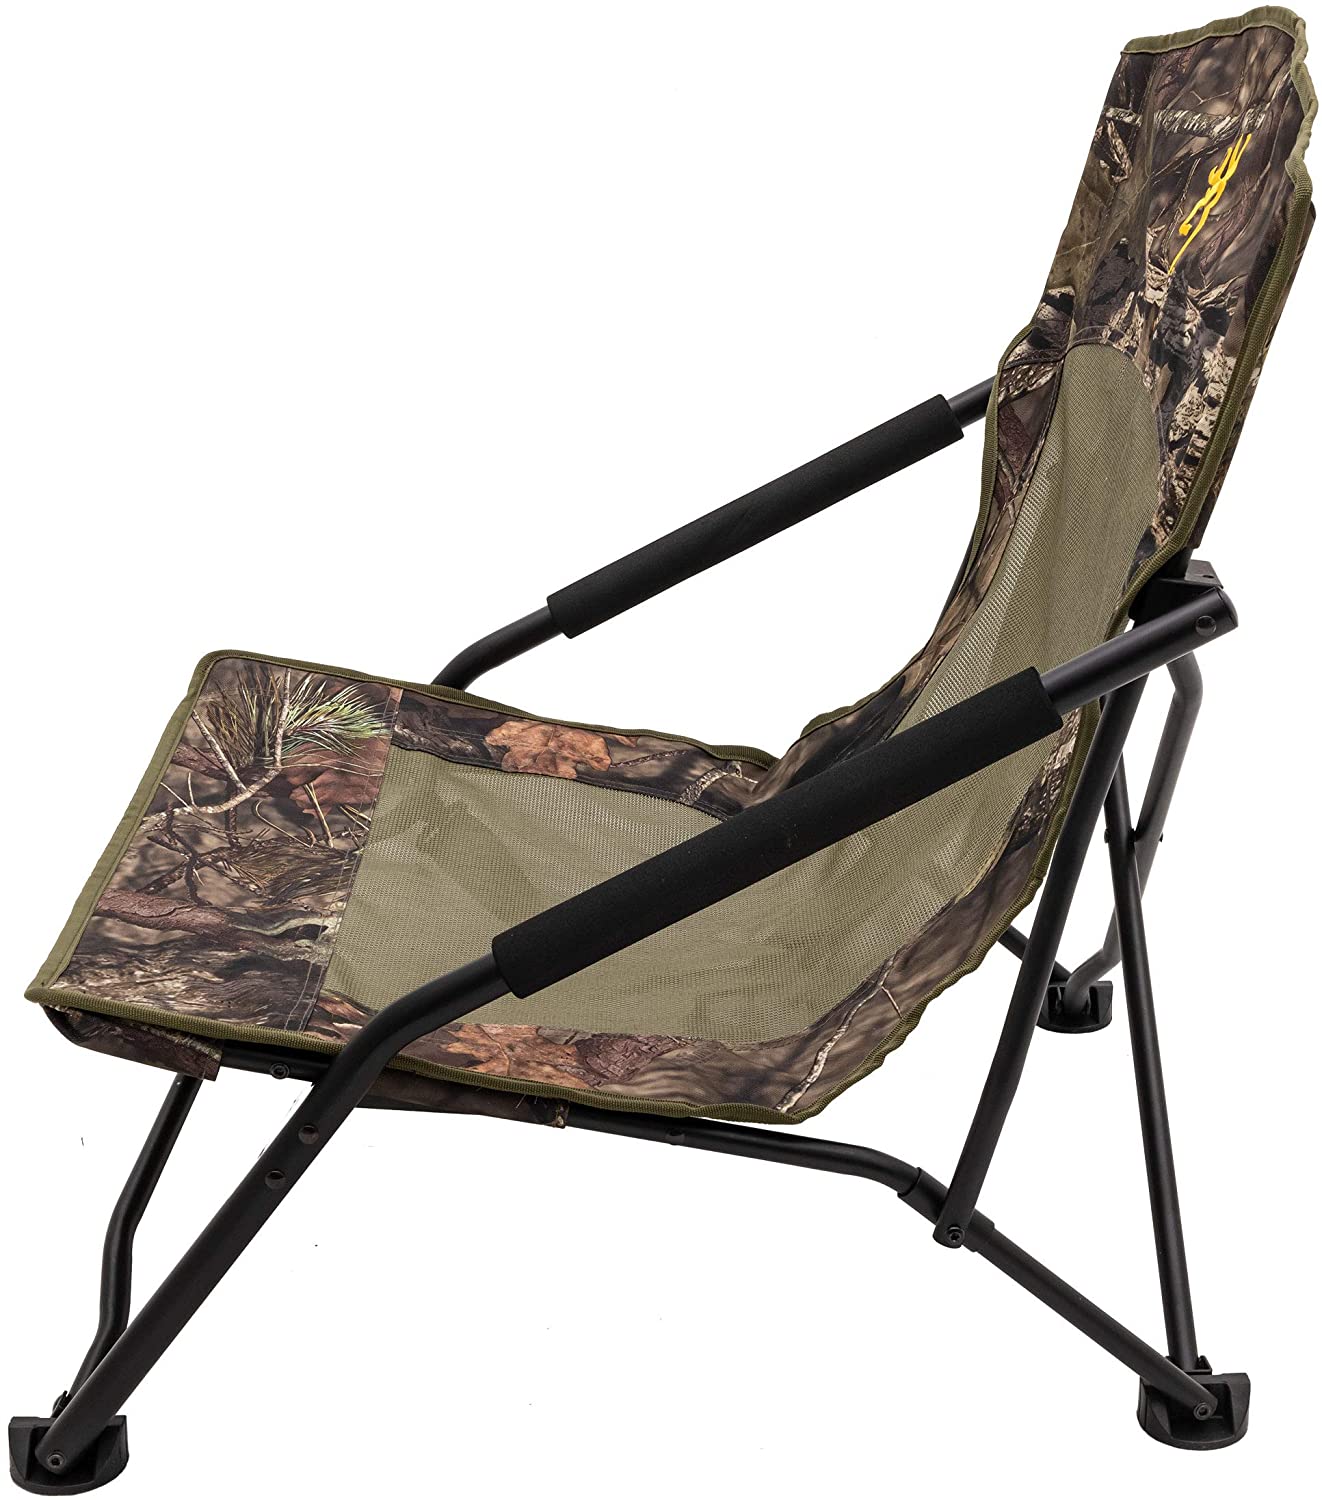 Browning Camping Strutter Hunting Chair - image 3 of 3